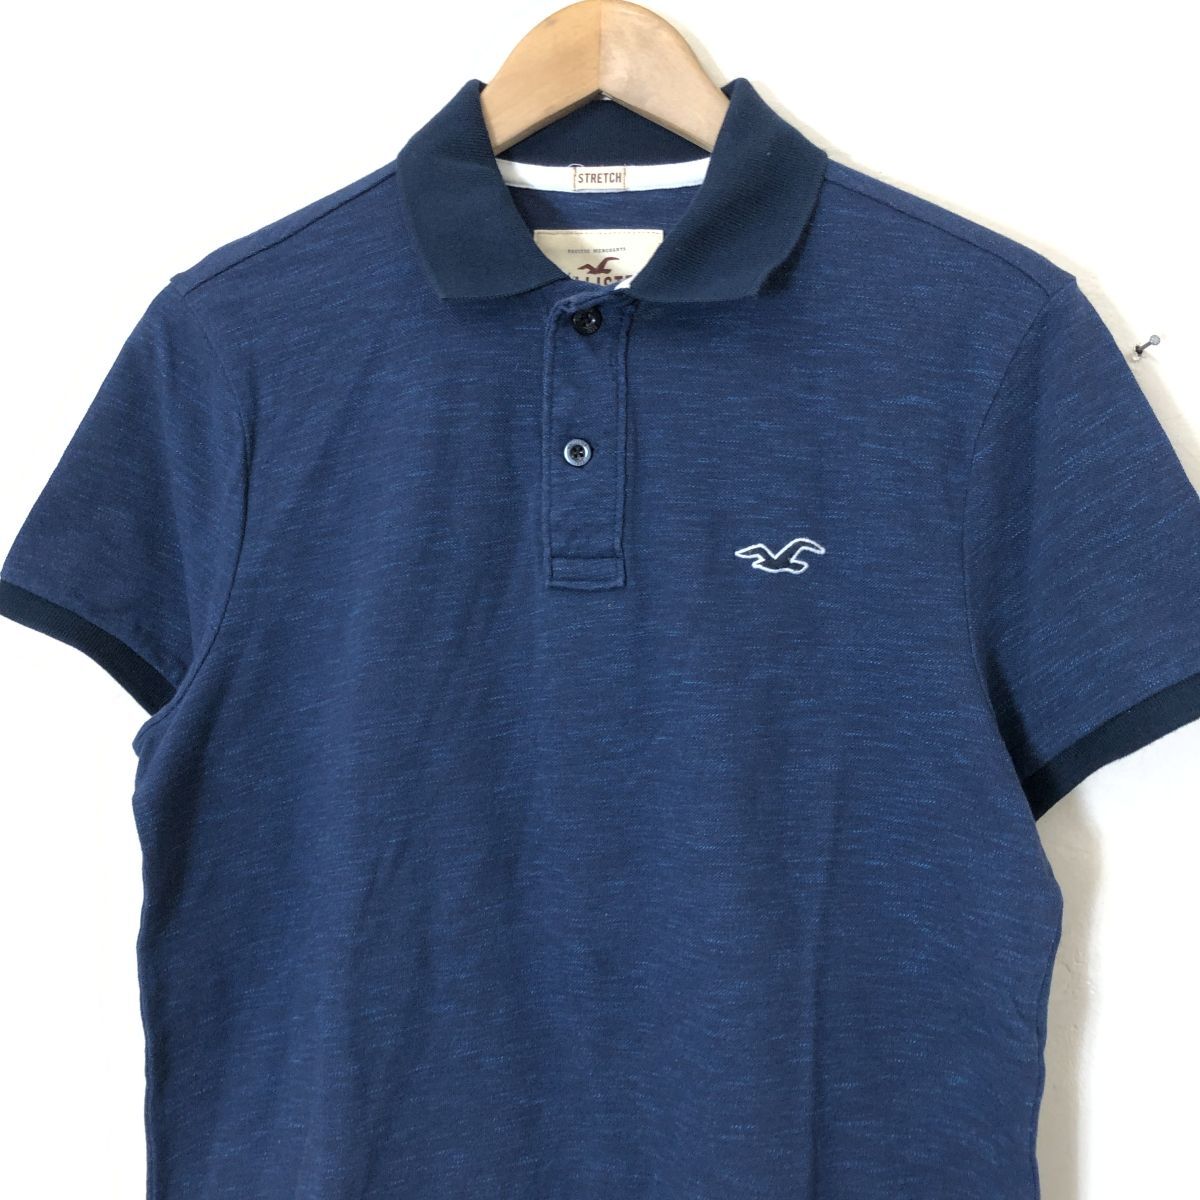 A1826-F-N* HOLLISTER Hollister polo-shirt with short sleeves tops * sizeS cotton 100 navy old clothes men's spring summer outdoor 